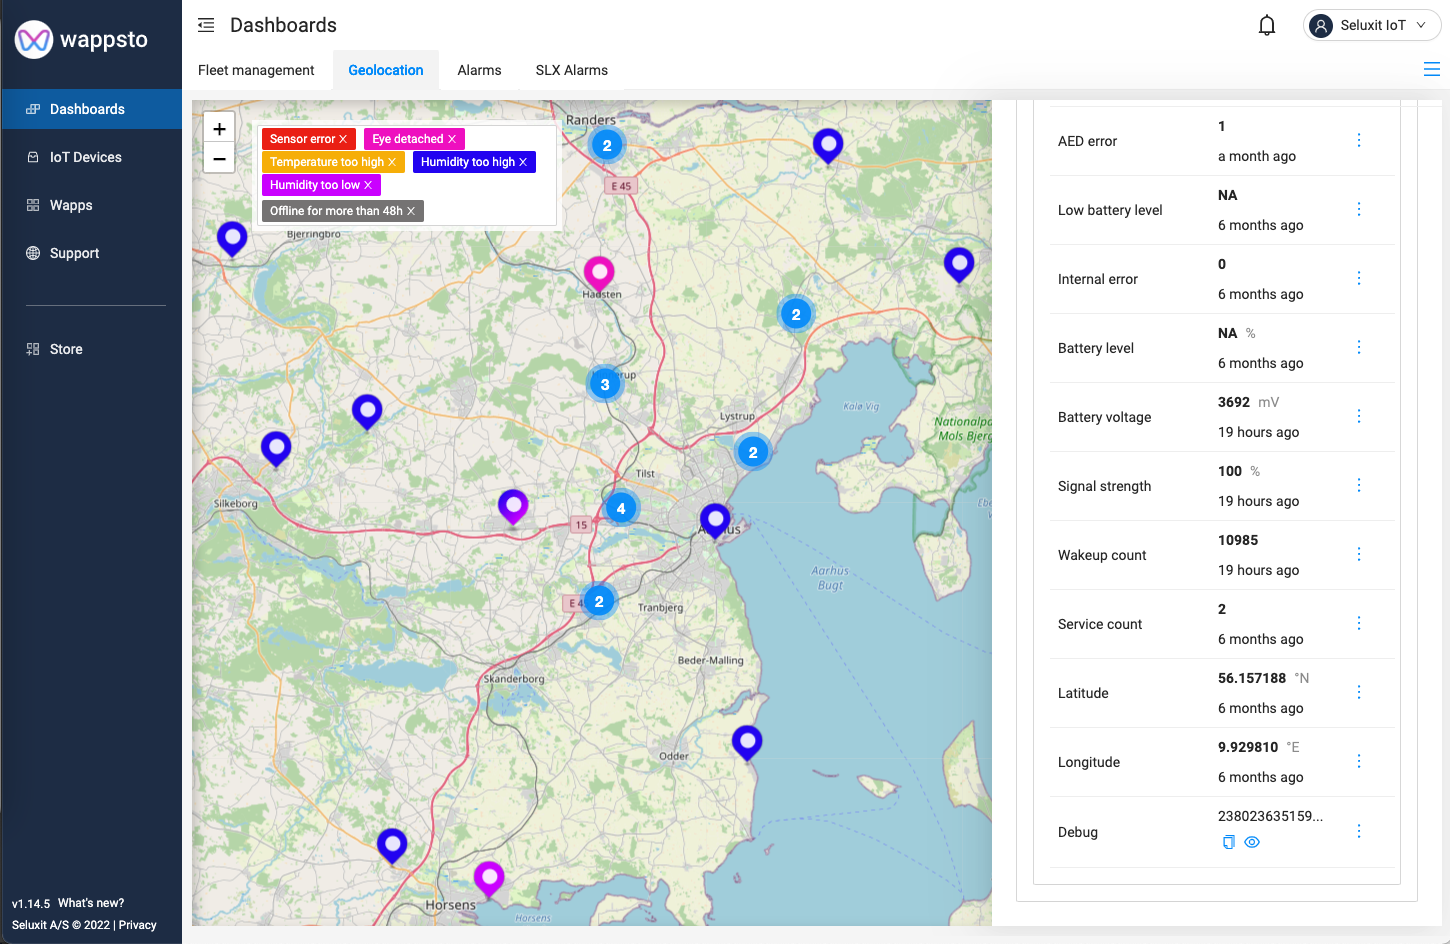 Wappsto geolocation dashboard with filtered devices